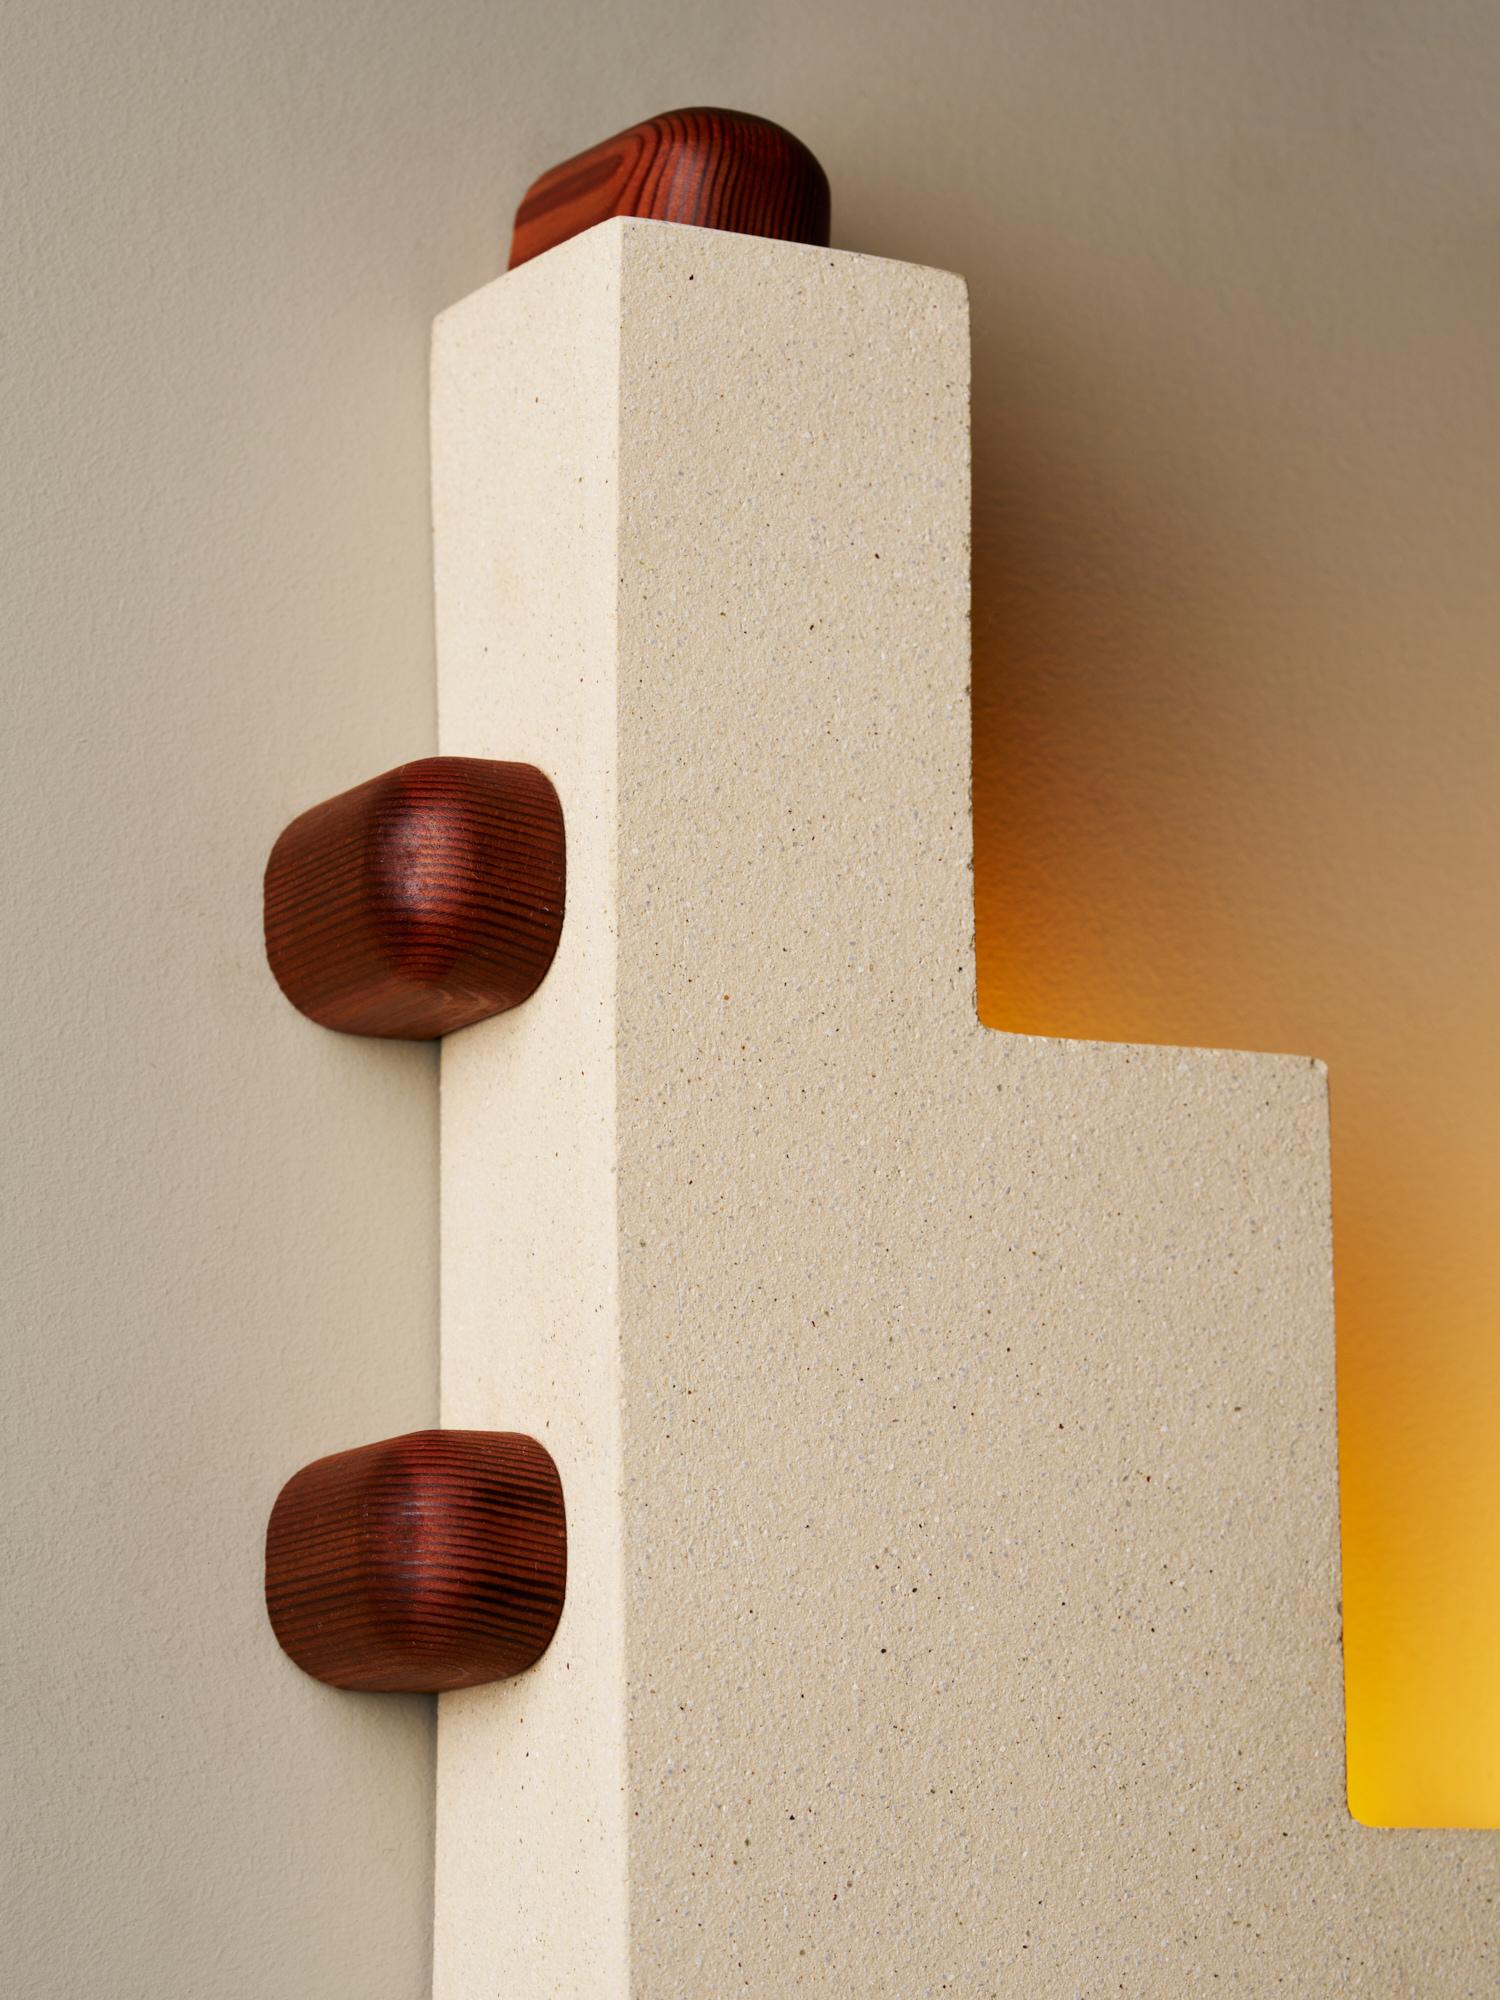 Contemporary Sierra Sconces in Ceramic, Wood and Brass by Piscina - C1 For Sale